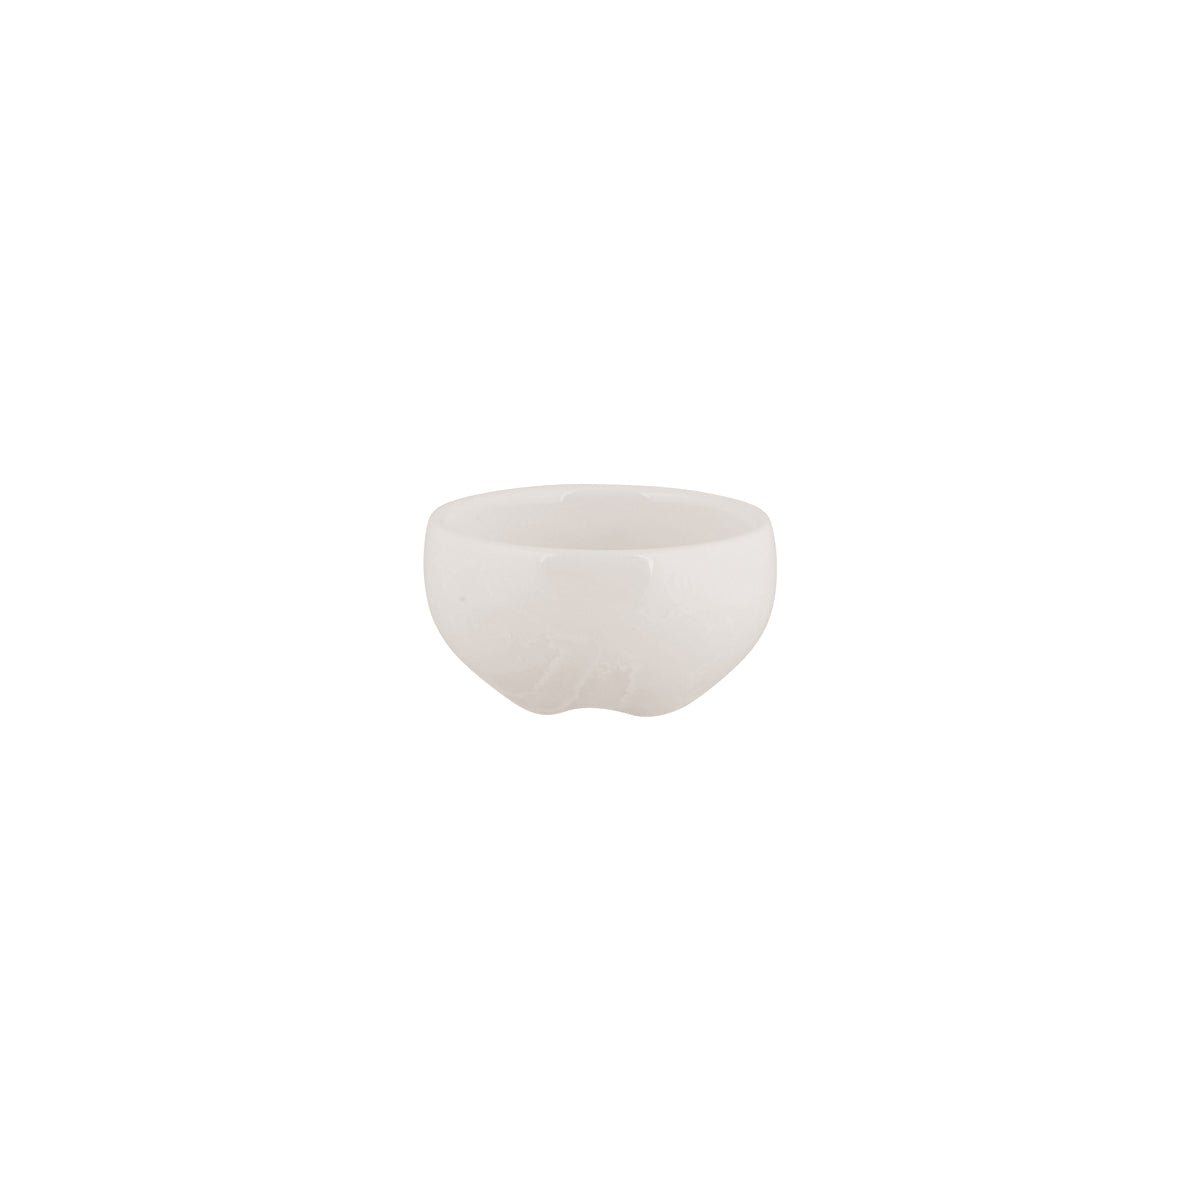 Ramekin - 75ml, Snow, Moda Porcelain from Moda Porcelain. made out of Porcelain and sold in boxes of 24. Hospitality quality at wholesale price with The Flying Fork! 